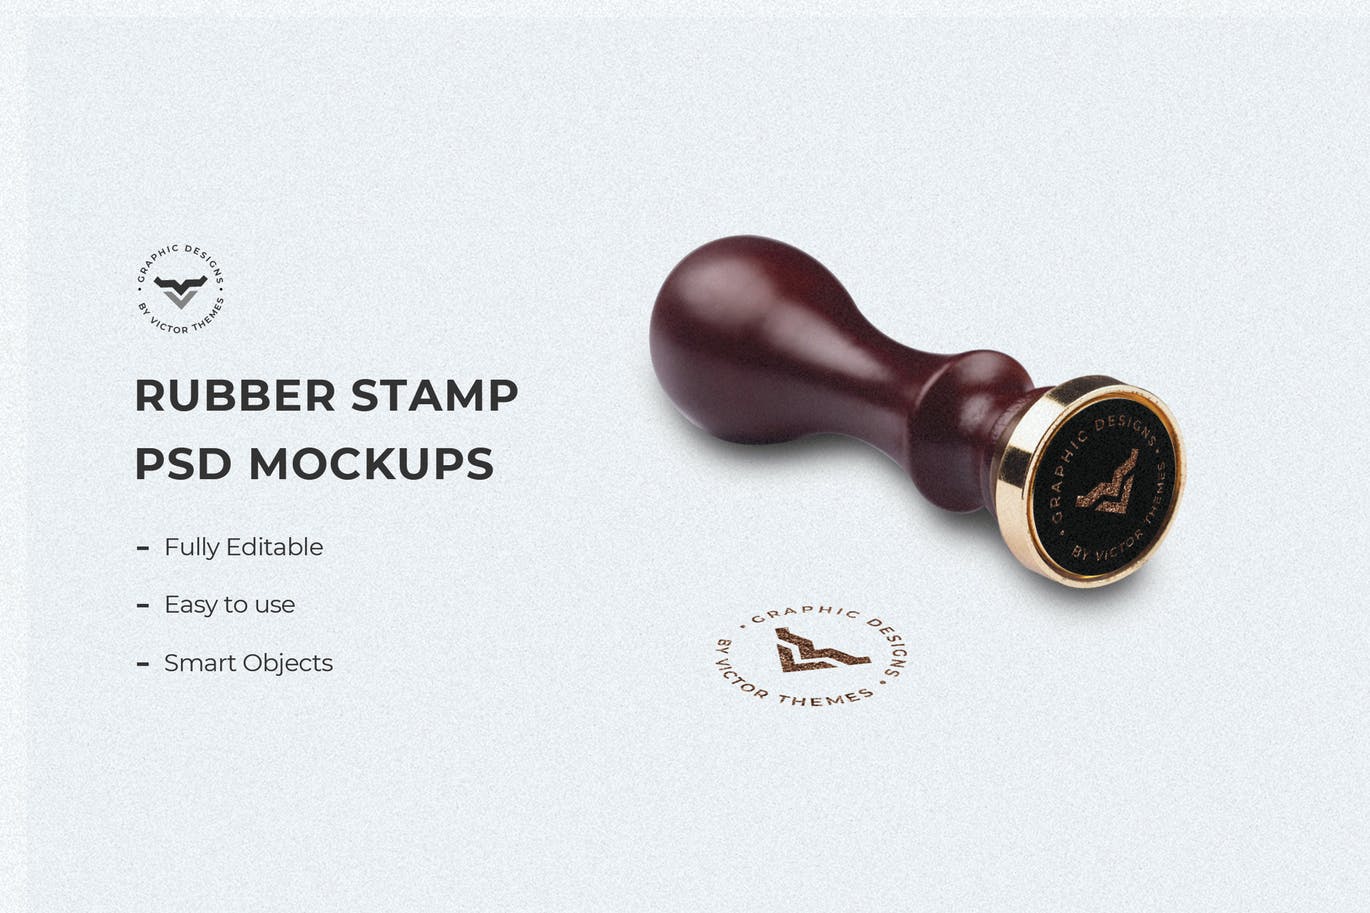 A rubber stamp mockup template